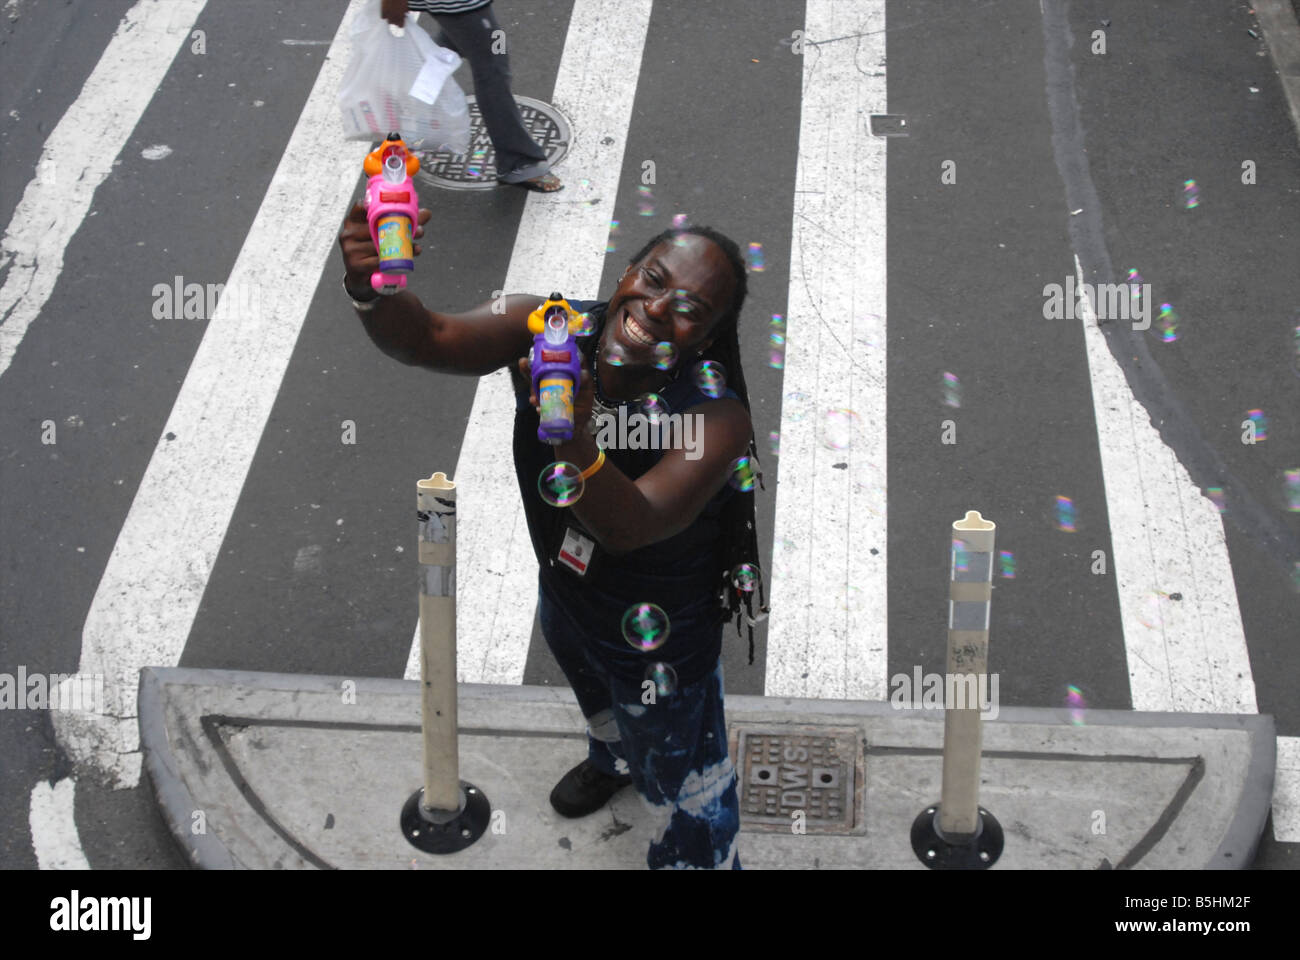 A happy bubble machine ventor on the street in New York, selling to people on busses. Stock Photo